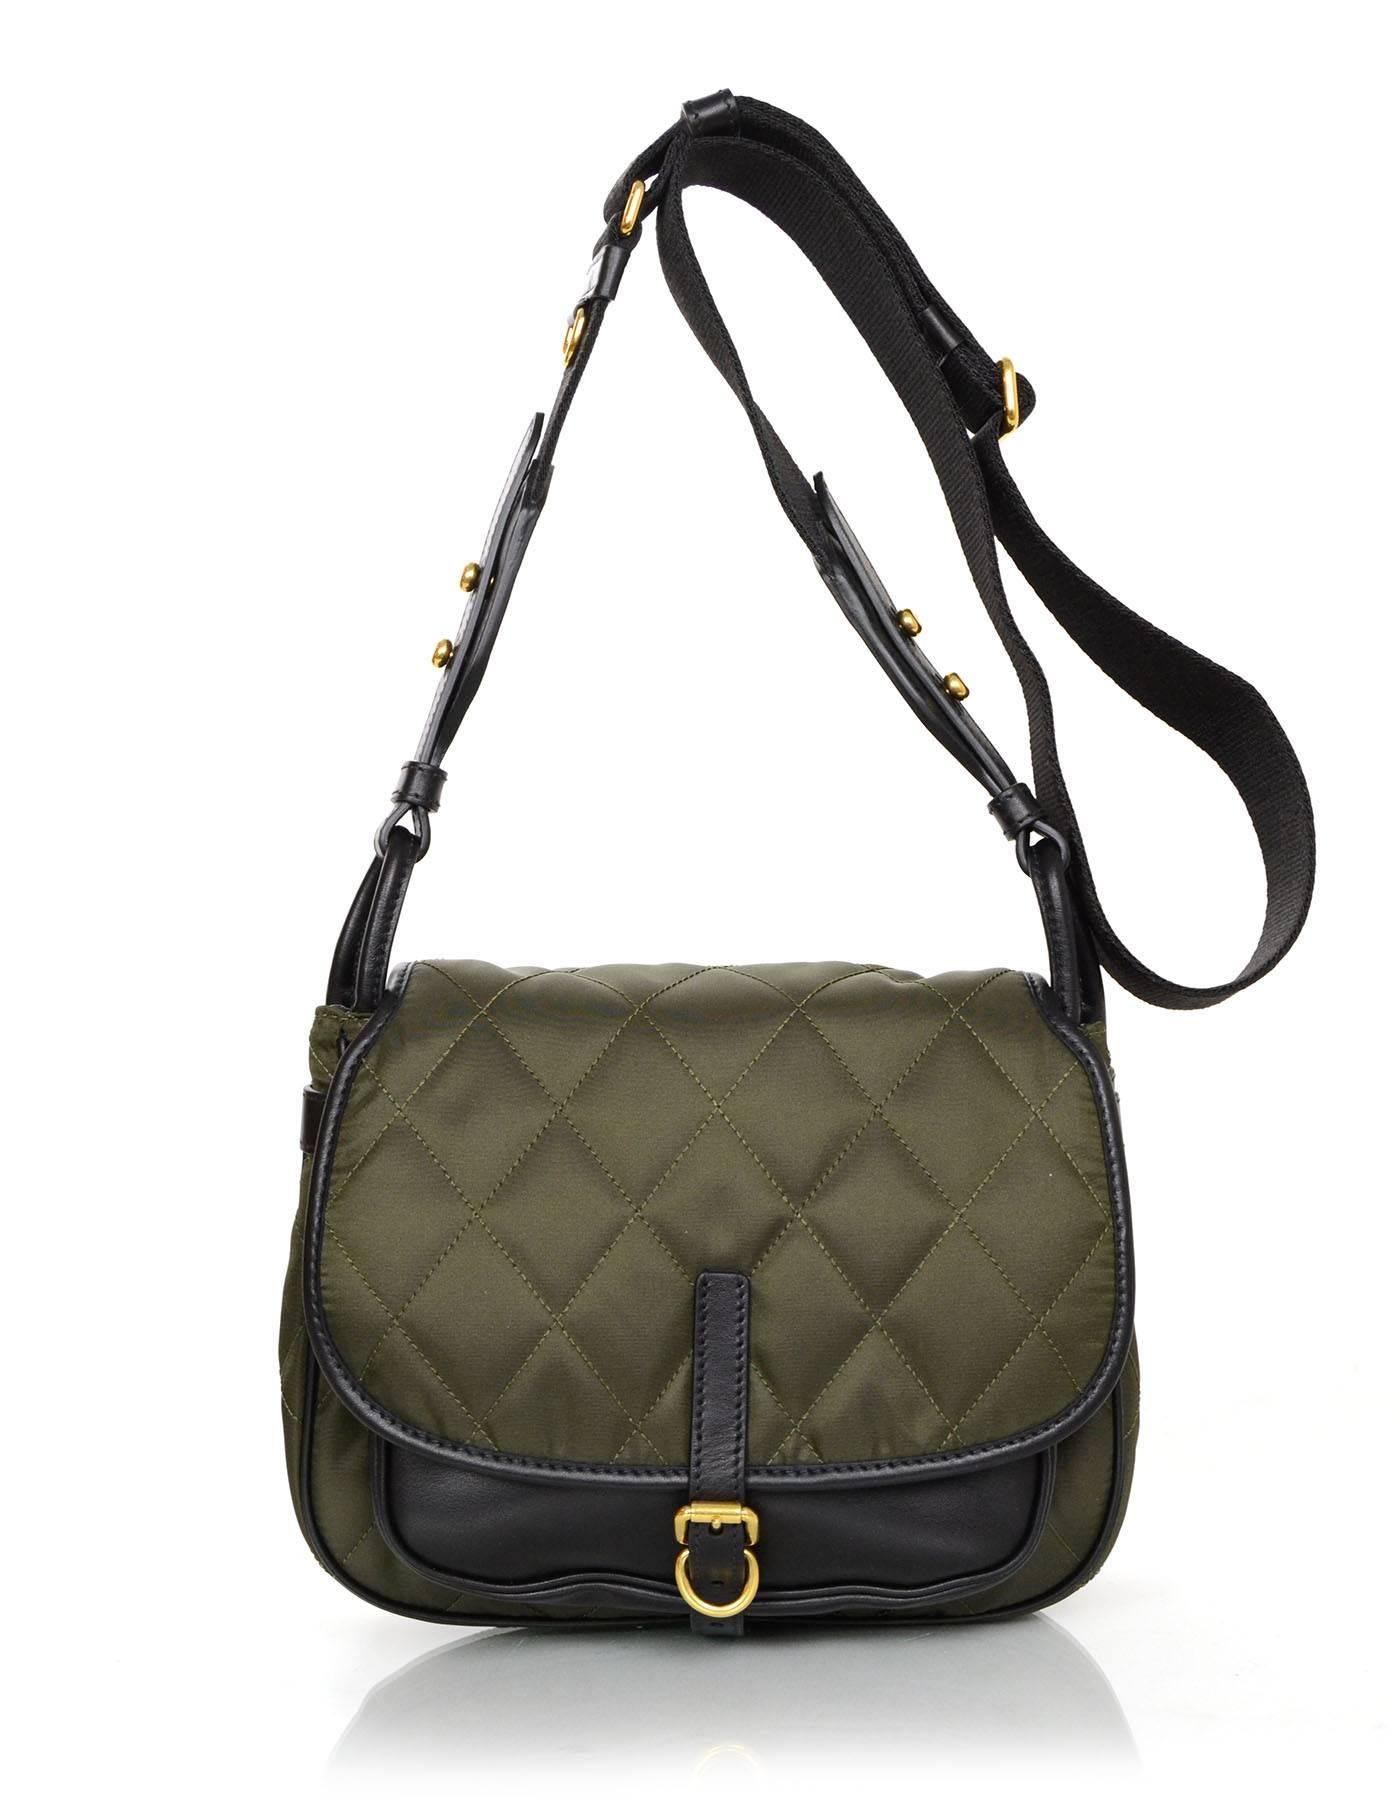 100% Authentic Prada Army Green & Black Corsaire Messenger.  Features army green quilted nylon and smooth black leather with removable goldtone O ring accents

Made In: Italy
Year of Production: 2016
Color: Army green and black
Hardware: